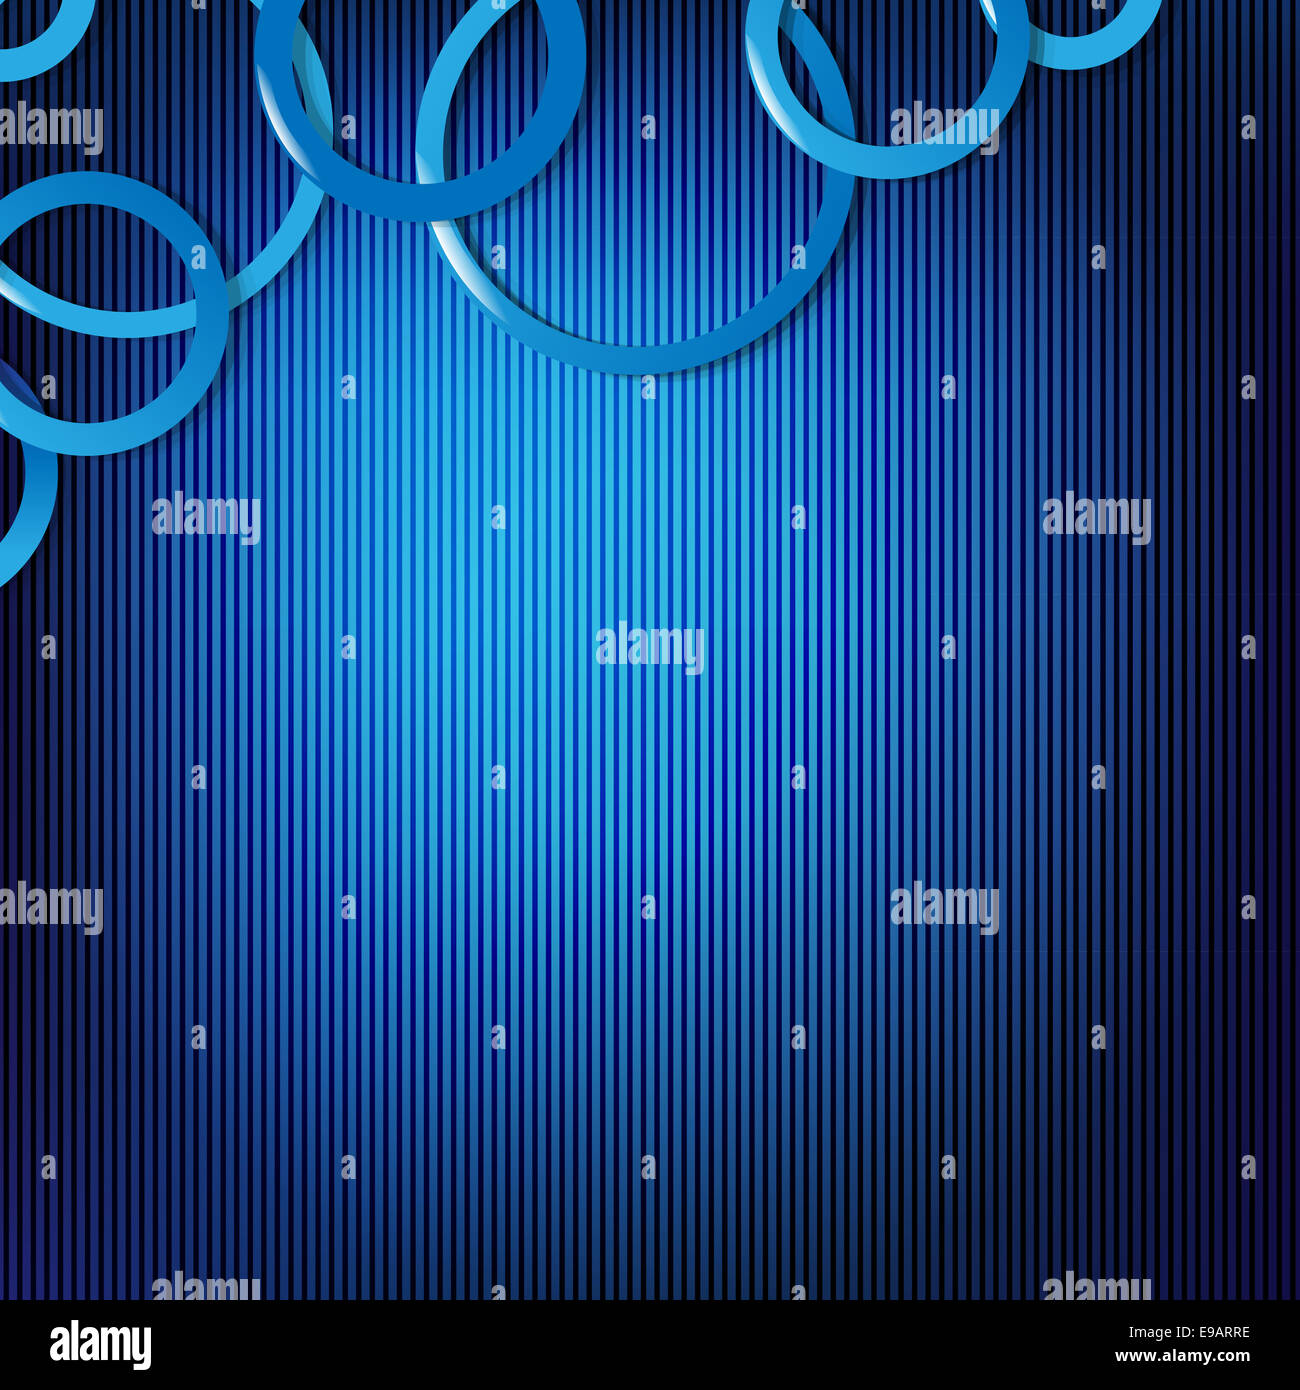 Dynamic Blue Background With Circles Stock Photo